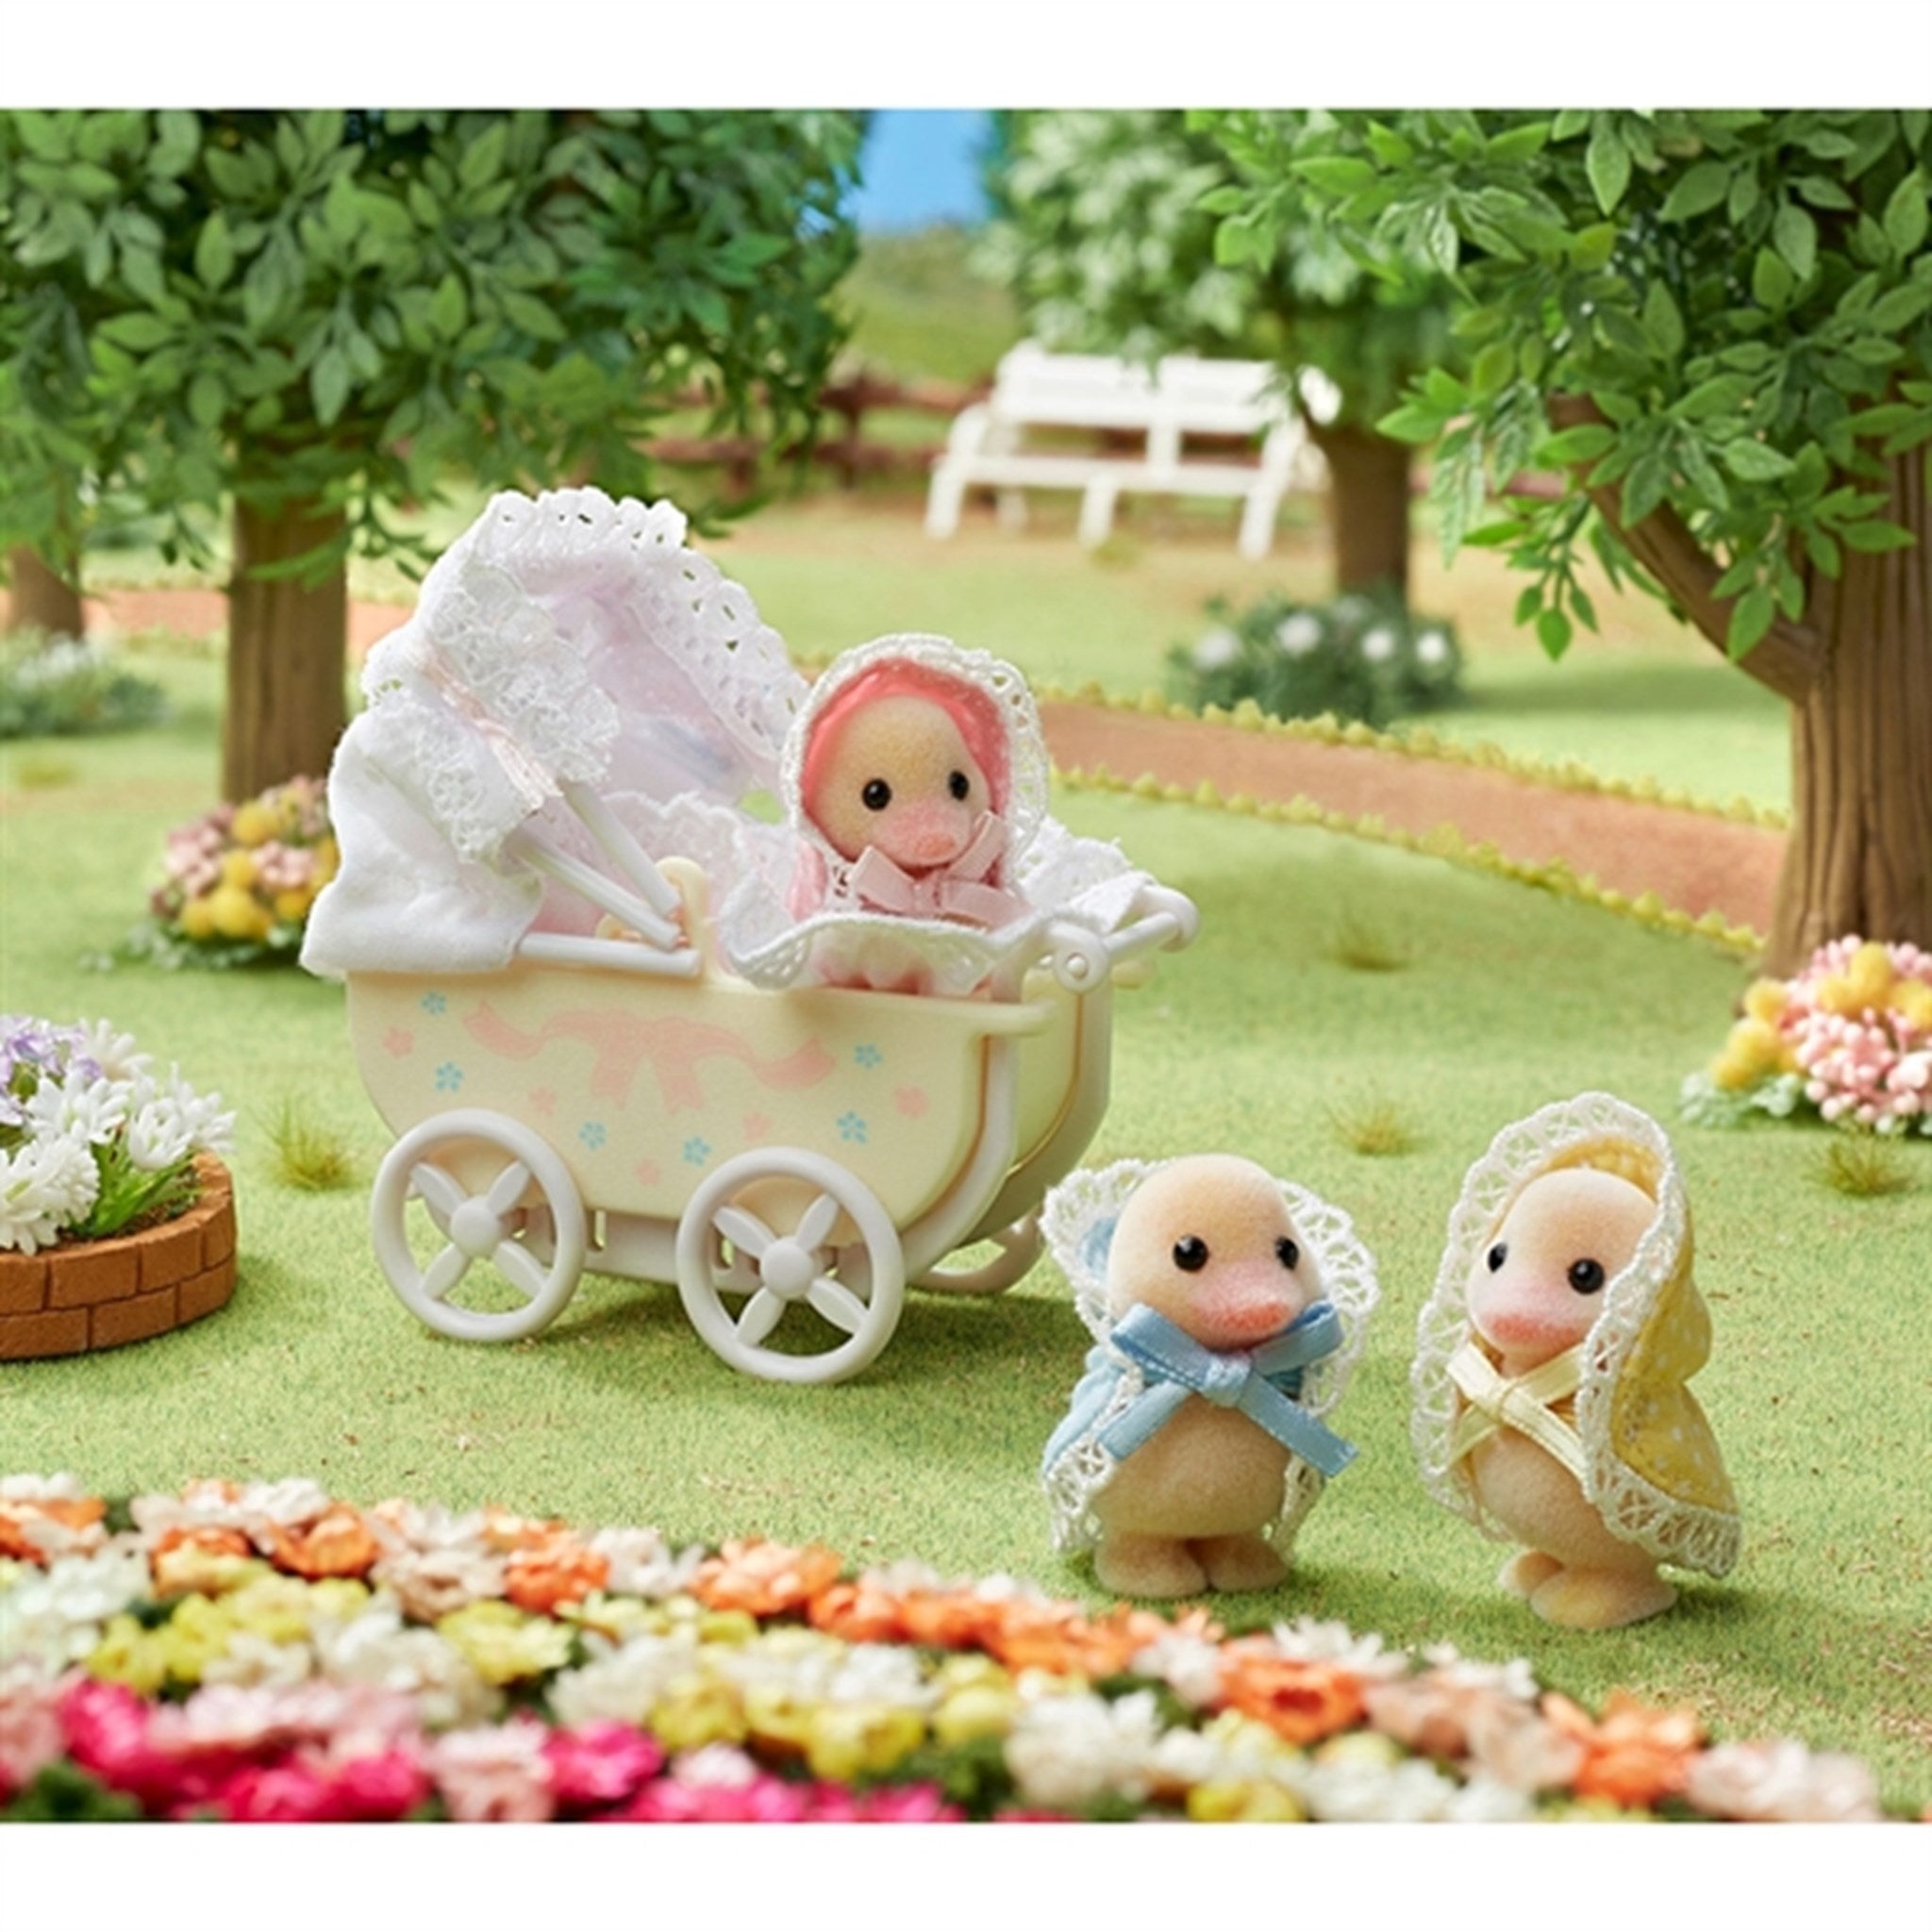 Sylvanian Families® Darling Ducklings Baby Carriage 2